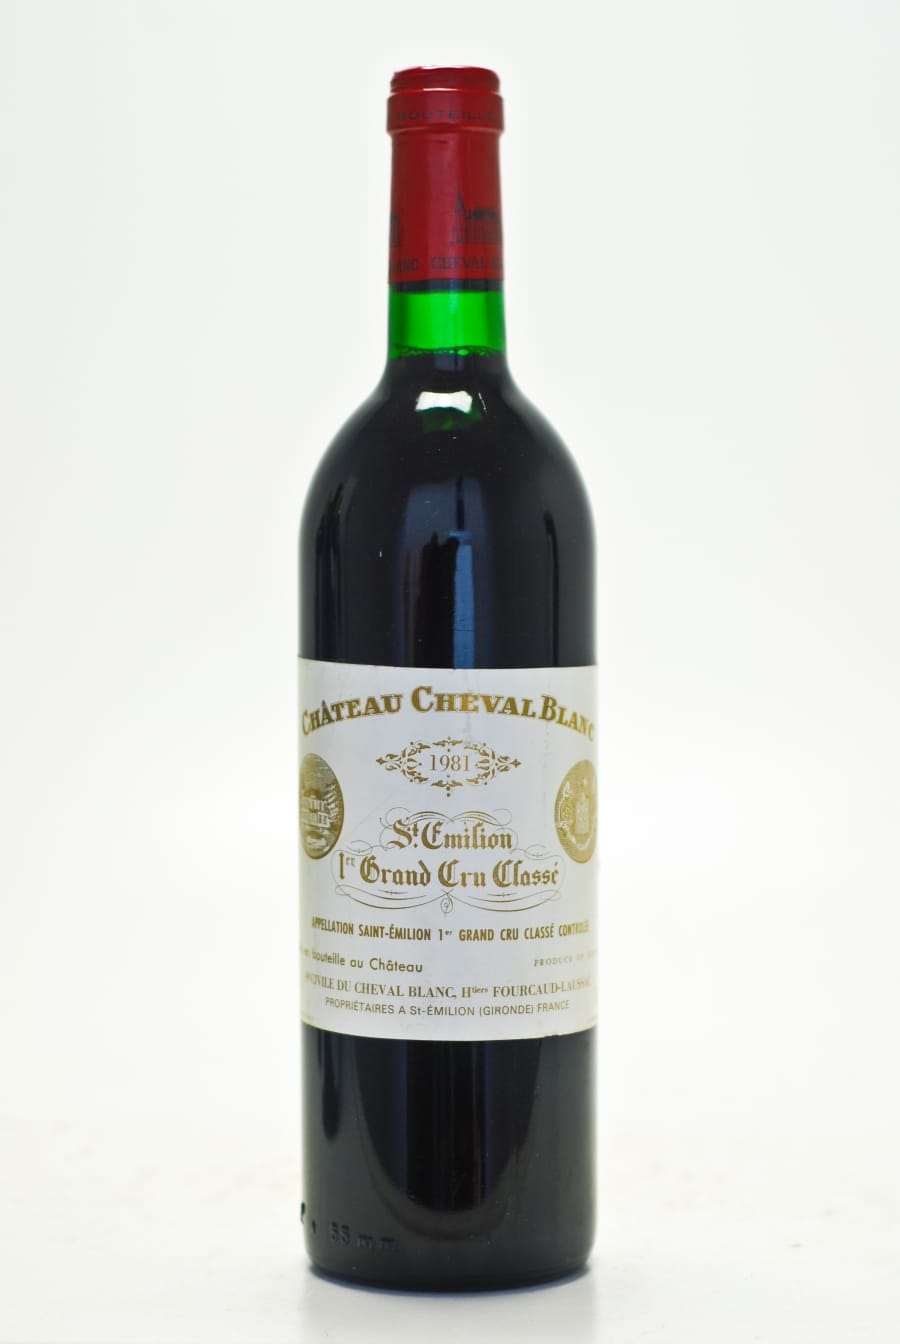 Chateau Cheval Blanc - Chateau Cheval Blanc 1981 From Original Wooden Case